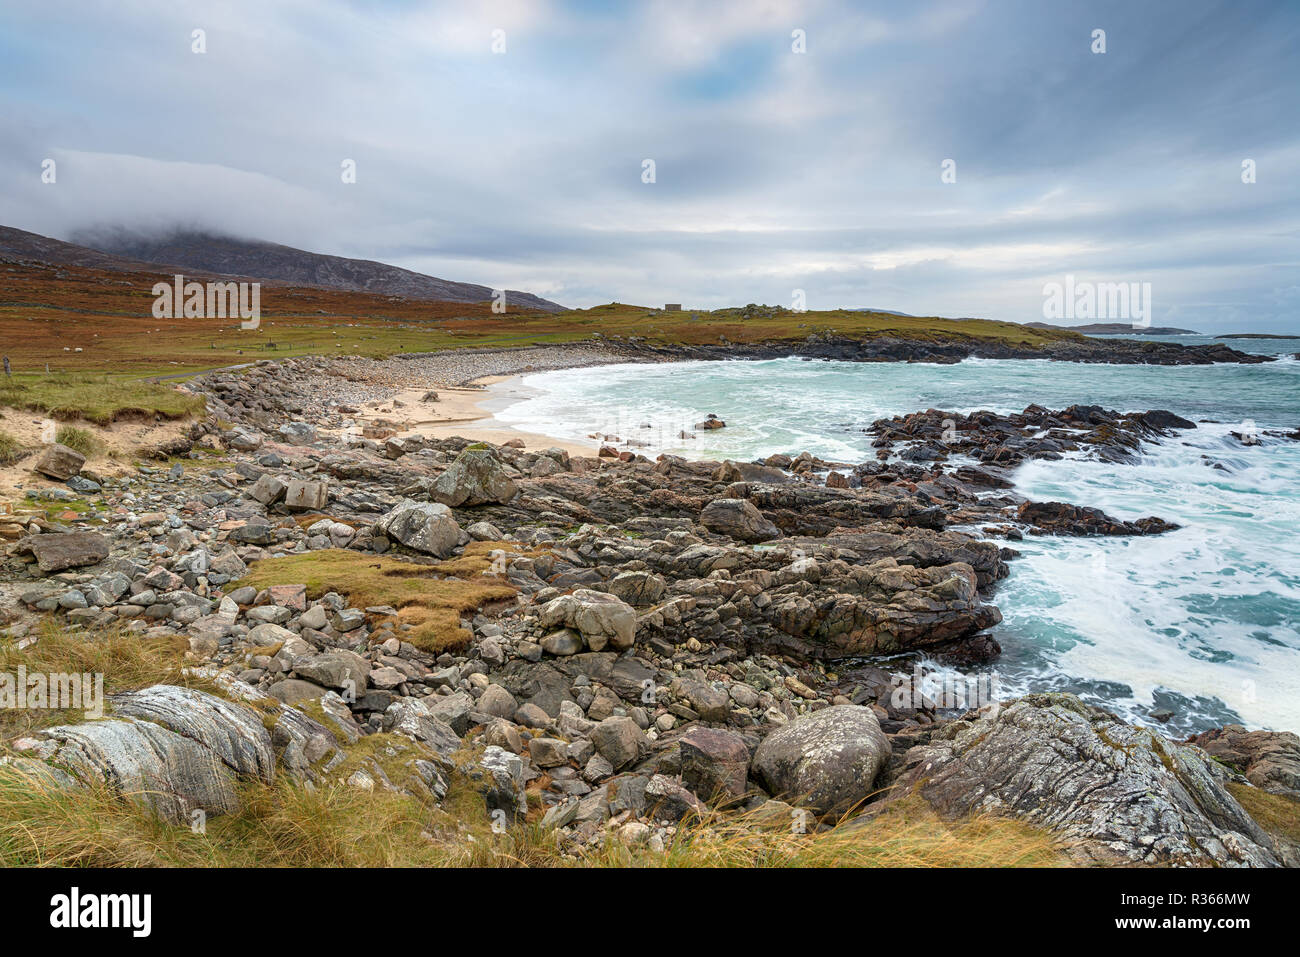 The beach at Mealsita, a remote location on the Isle of Lewis in the Outer Hebrides Stock Photo